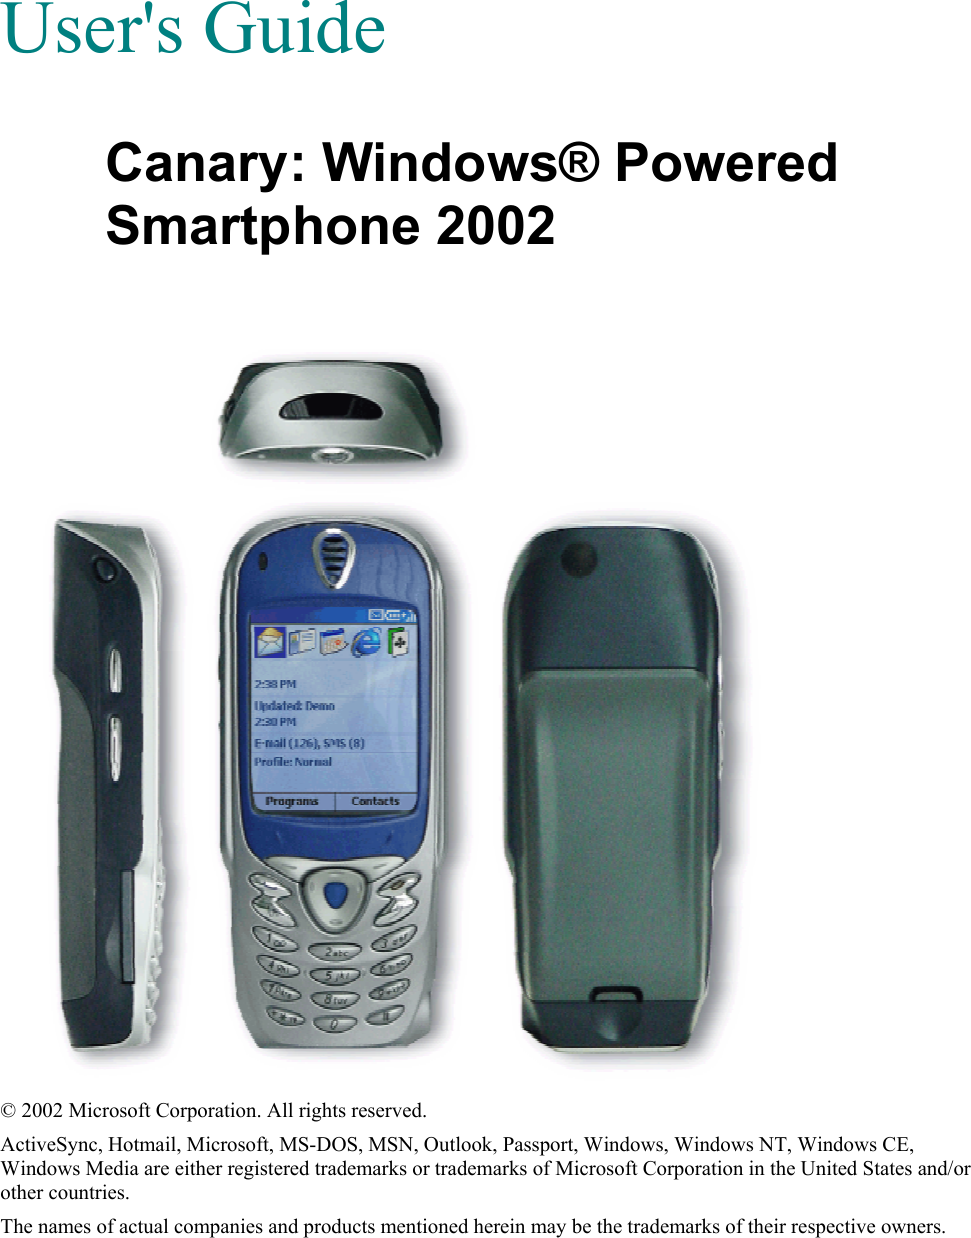   User&apos;s Guide Canary: Windows® Powered Smartphone 2002   © 2002 Microsoft Corporation. All rights reserved. ActiveSync, Hotmail, Microsoft, MS-DOS, MSN, Outlook, Passport, Windows, Windows NT, Windows CE, Windows Media are either registered trademarks or trademarks of Microsoft Corporation in the United States and/or other countries. The names of actual companies and products mentioned herein may be the trademarks of their respective owners. 